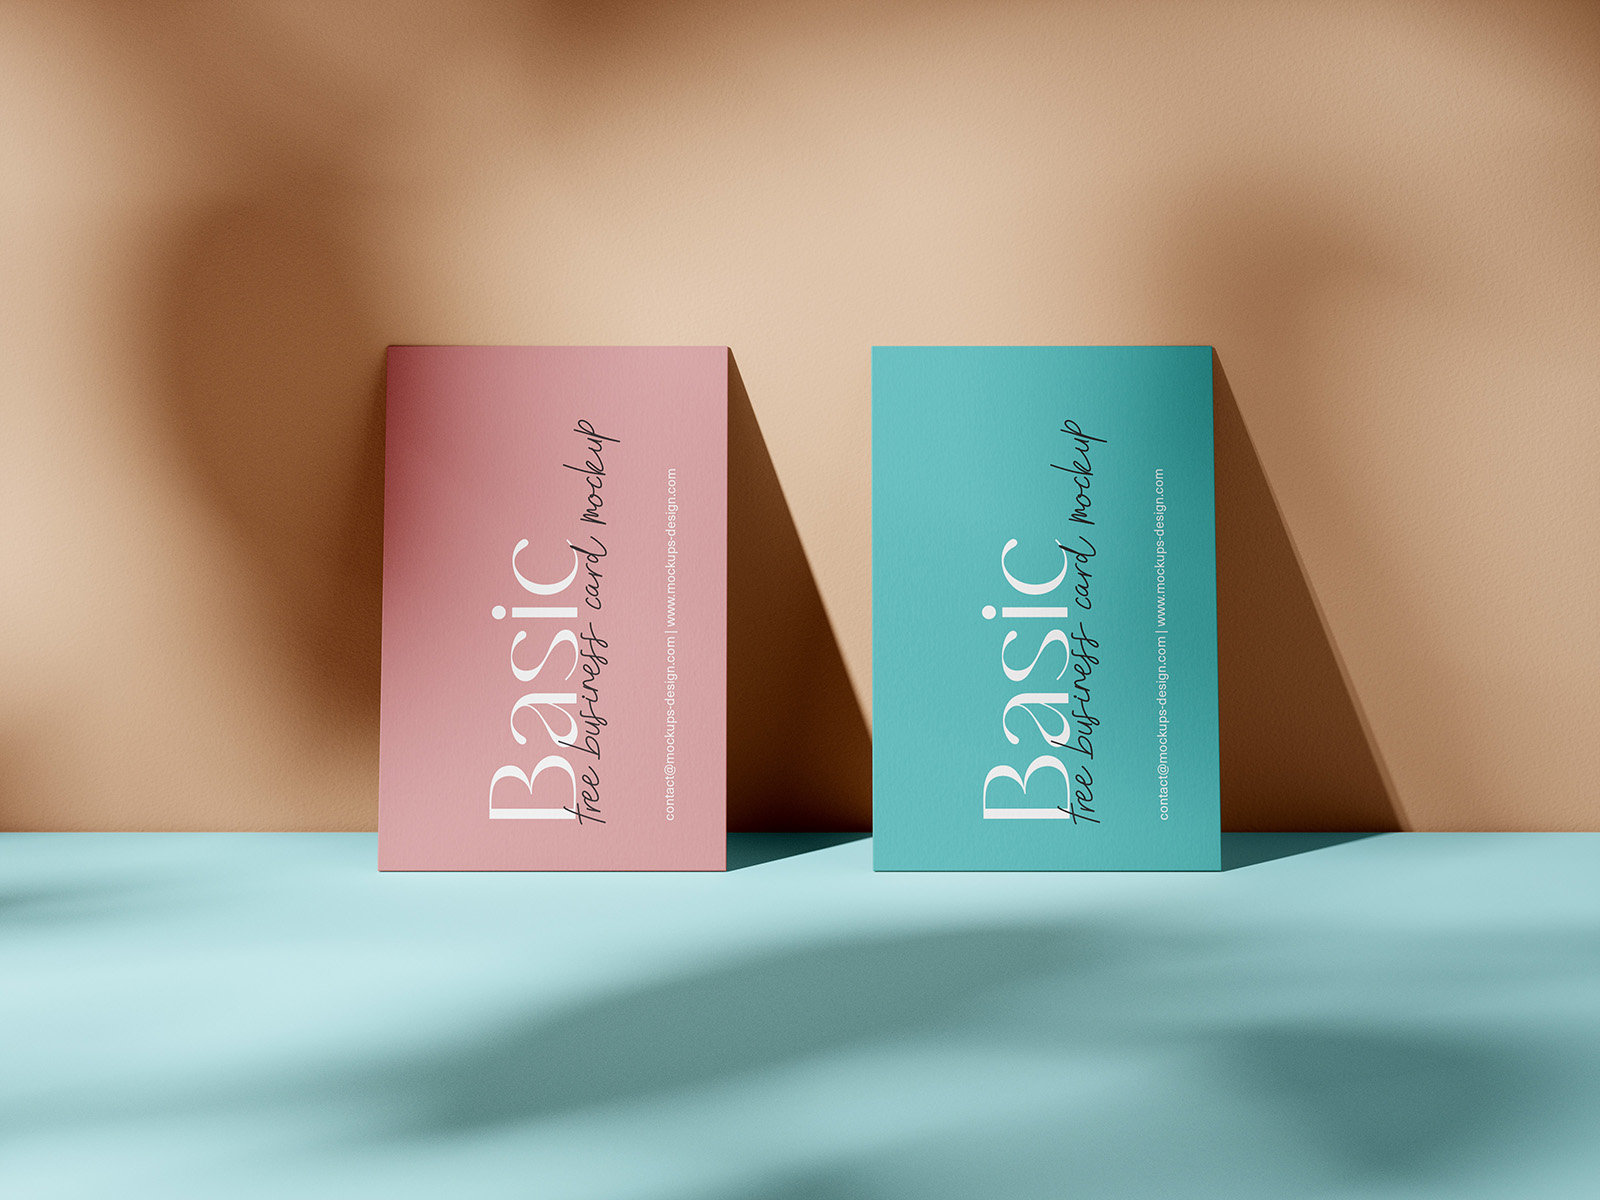 5 Business Cards Mockups in Various Views FREE PSD